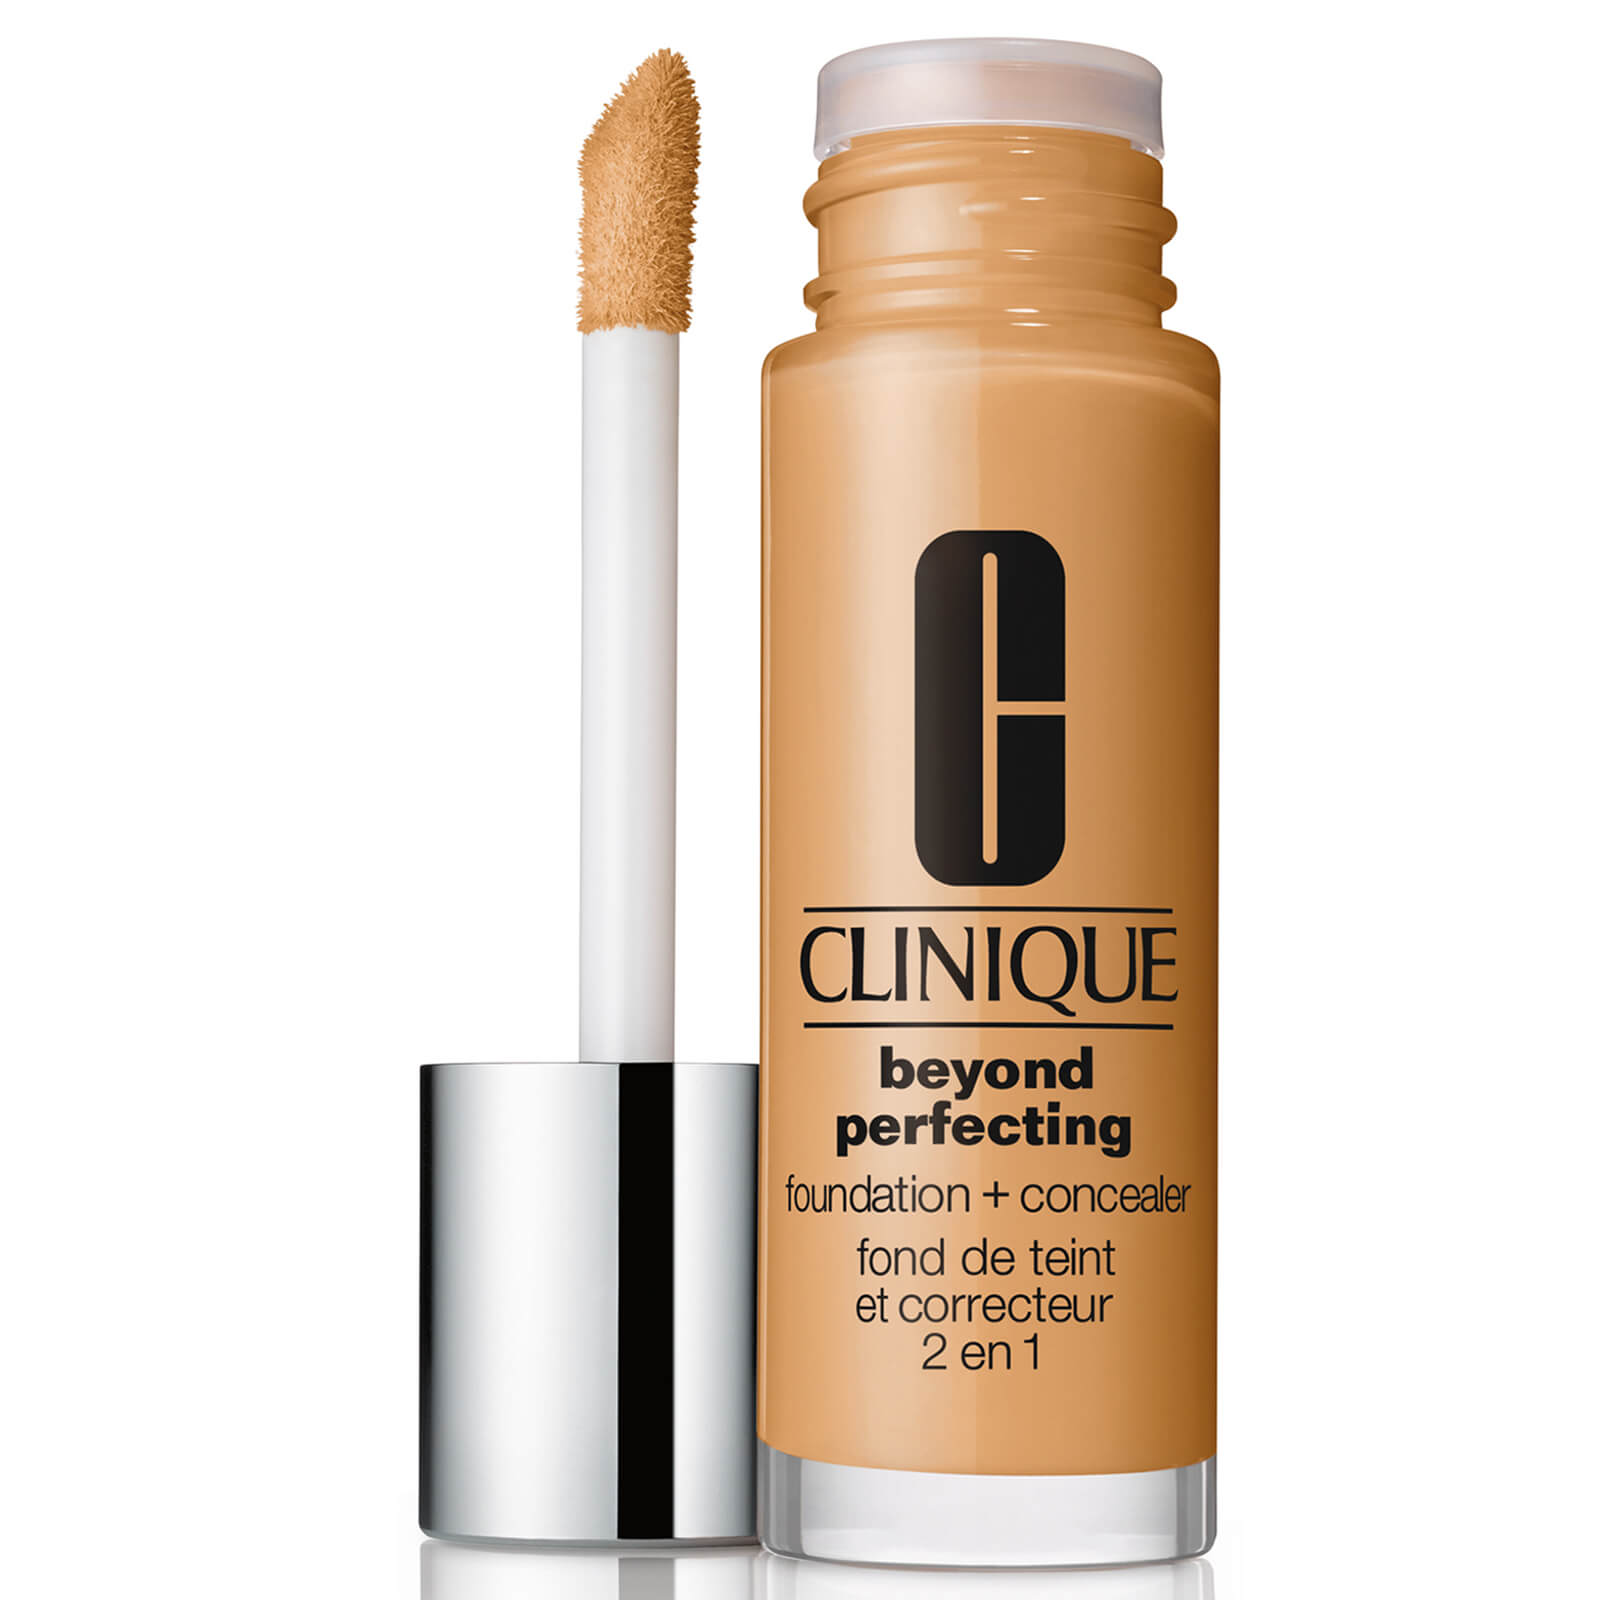 Clinique Beyond Perfecting Foundation and Concealer 30ml (Various Shades) - Honey Wheat